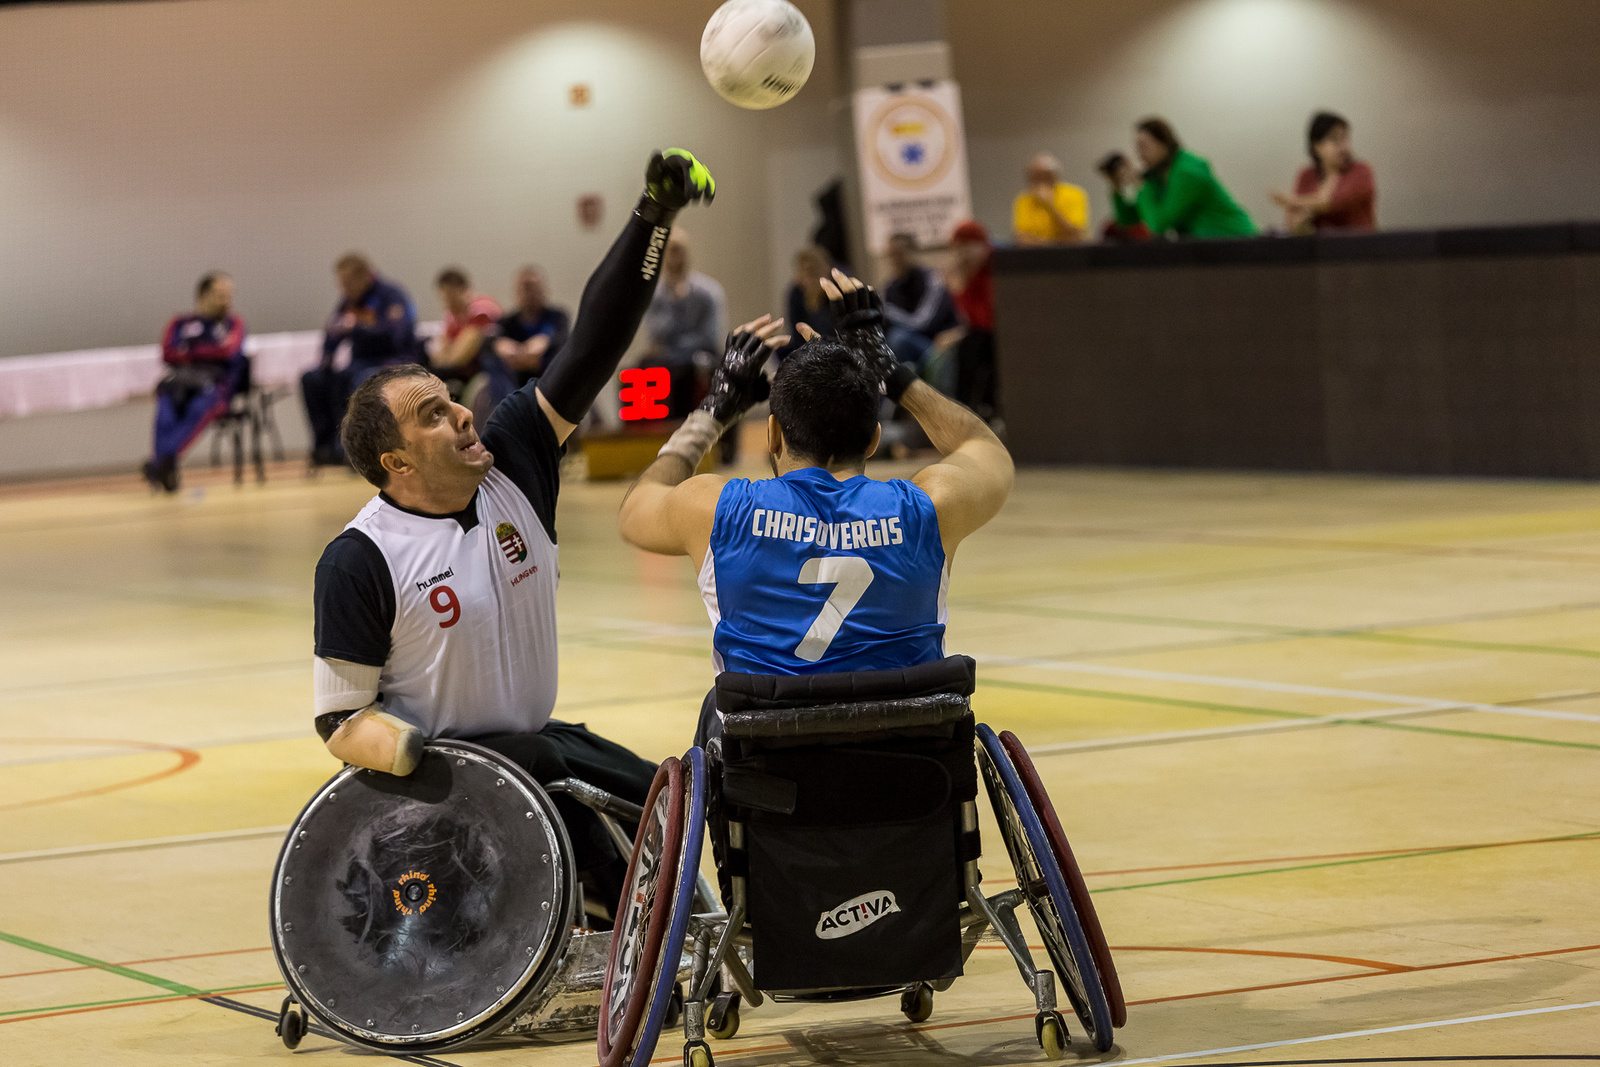 002 14 01 23 wheelchair rugby